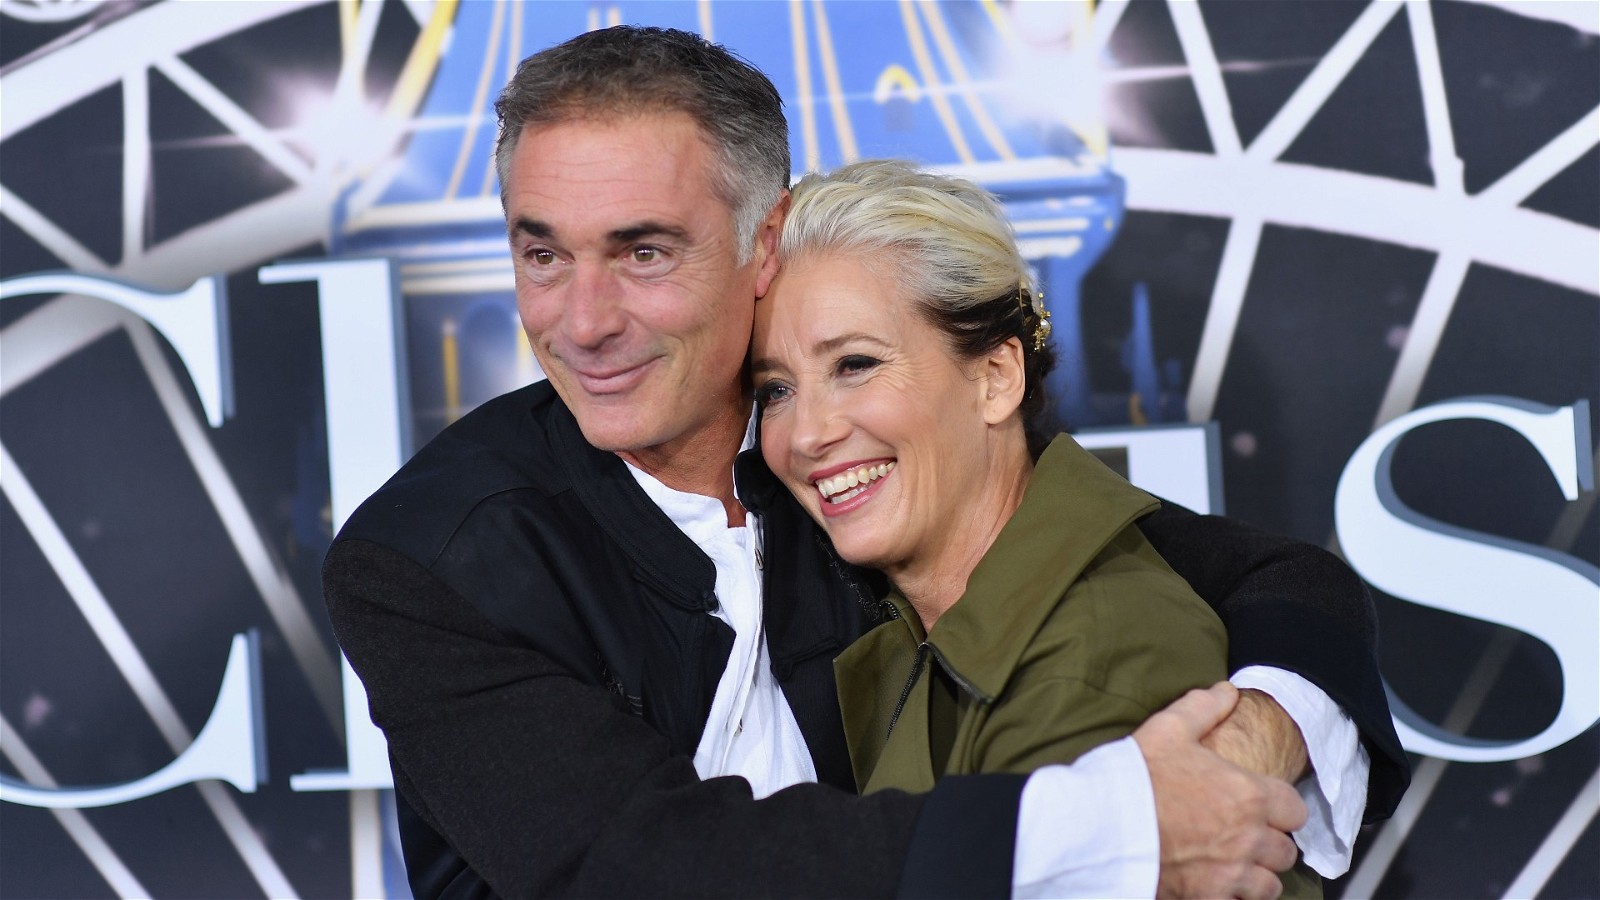 Thompson is in a happy marriage with Greg Wise